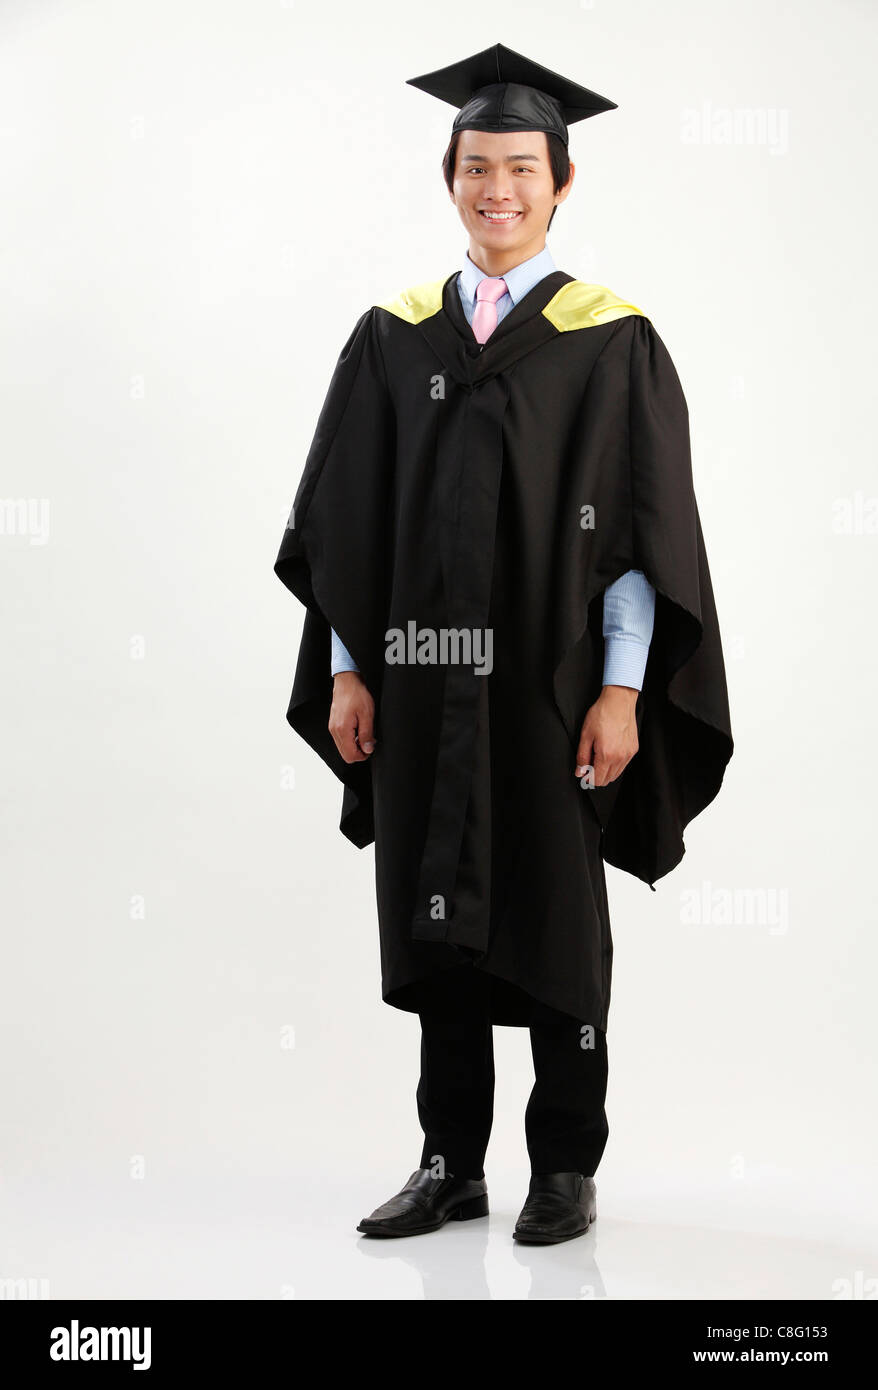 Full Length Of The Man In The Graduation Gown Stock Photo, Royalty ...